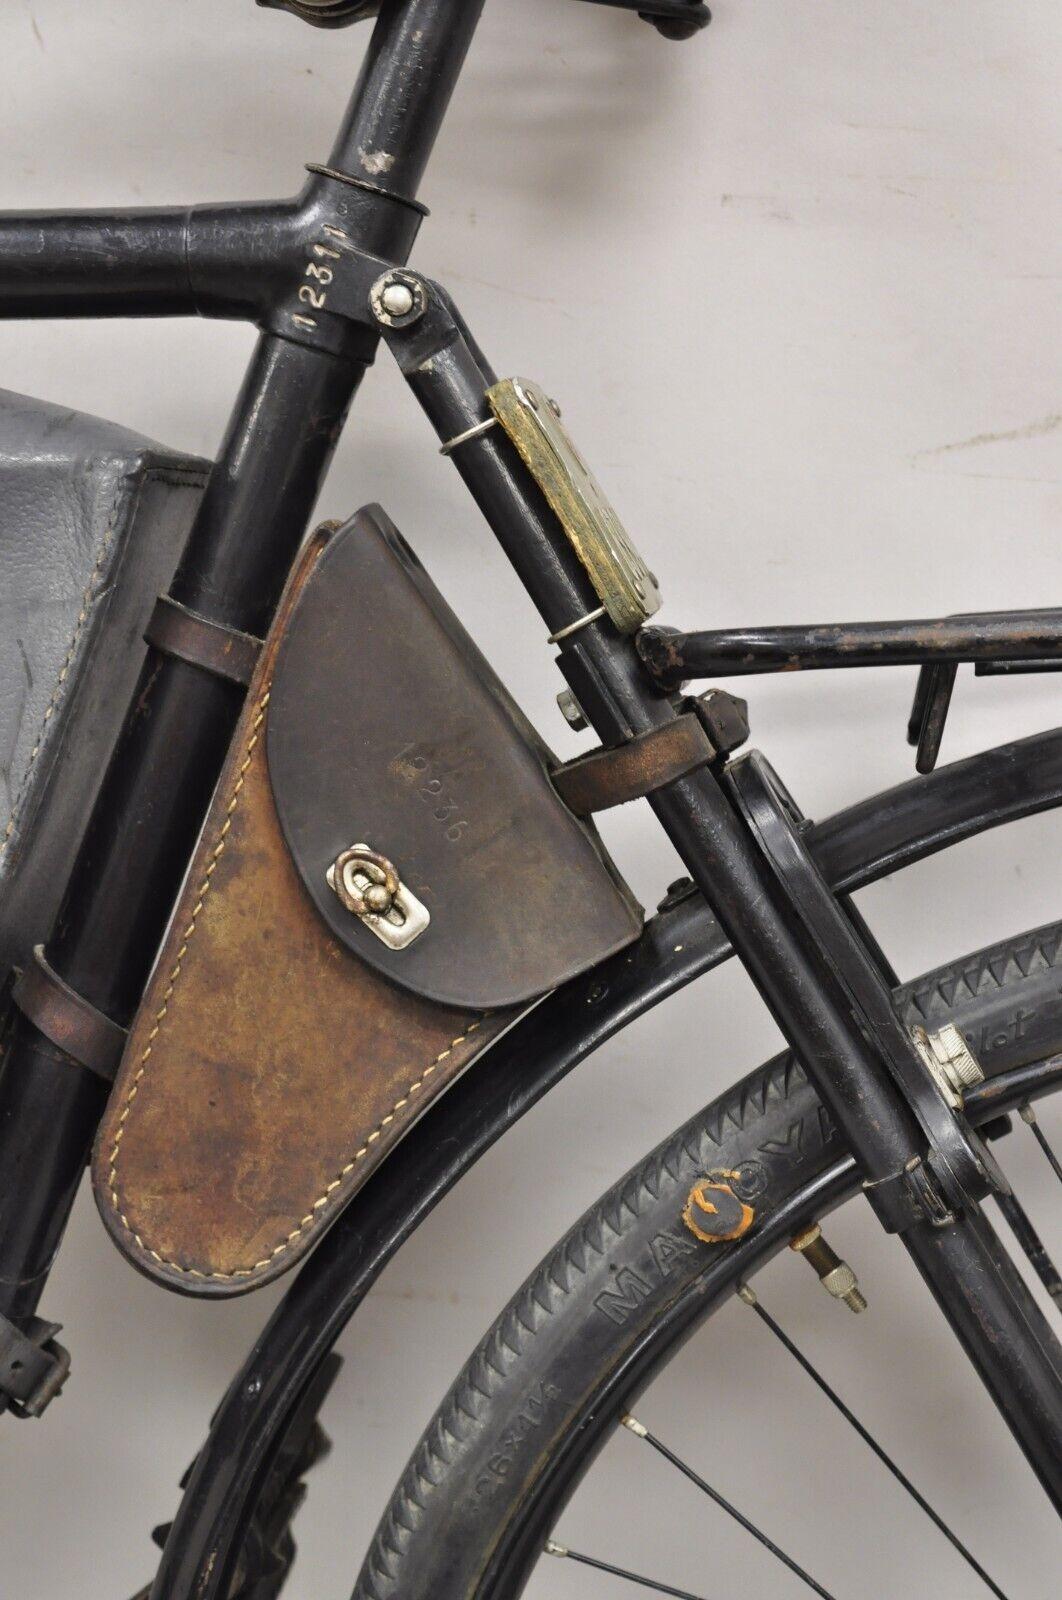 ww2 bicycle for sale